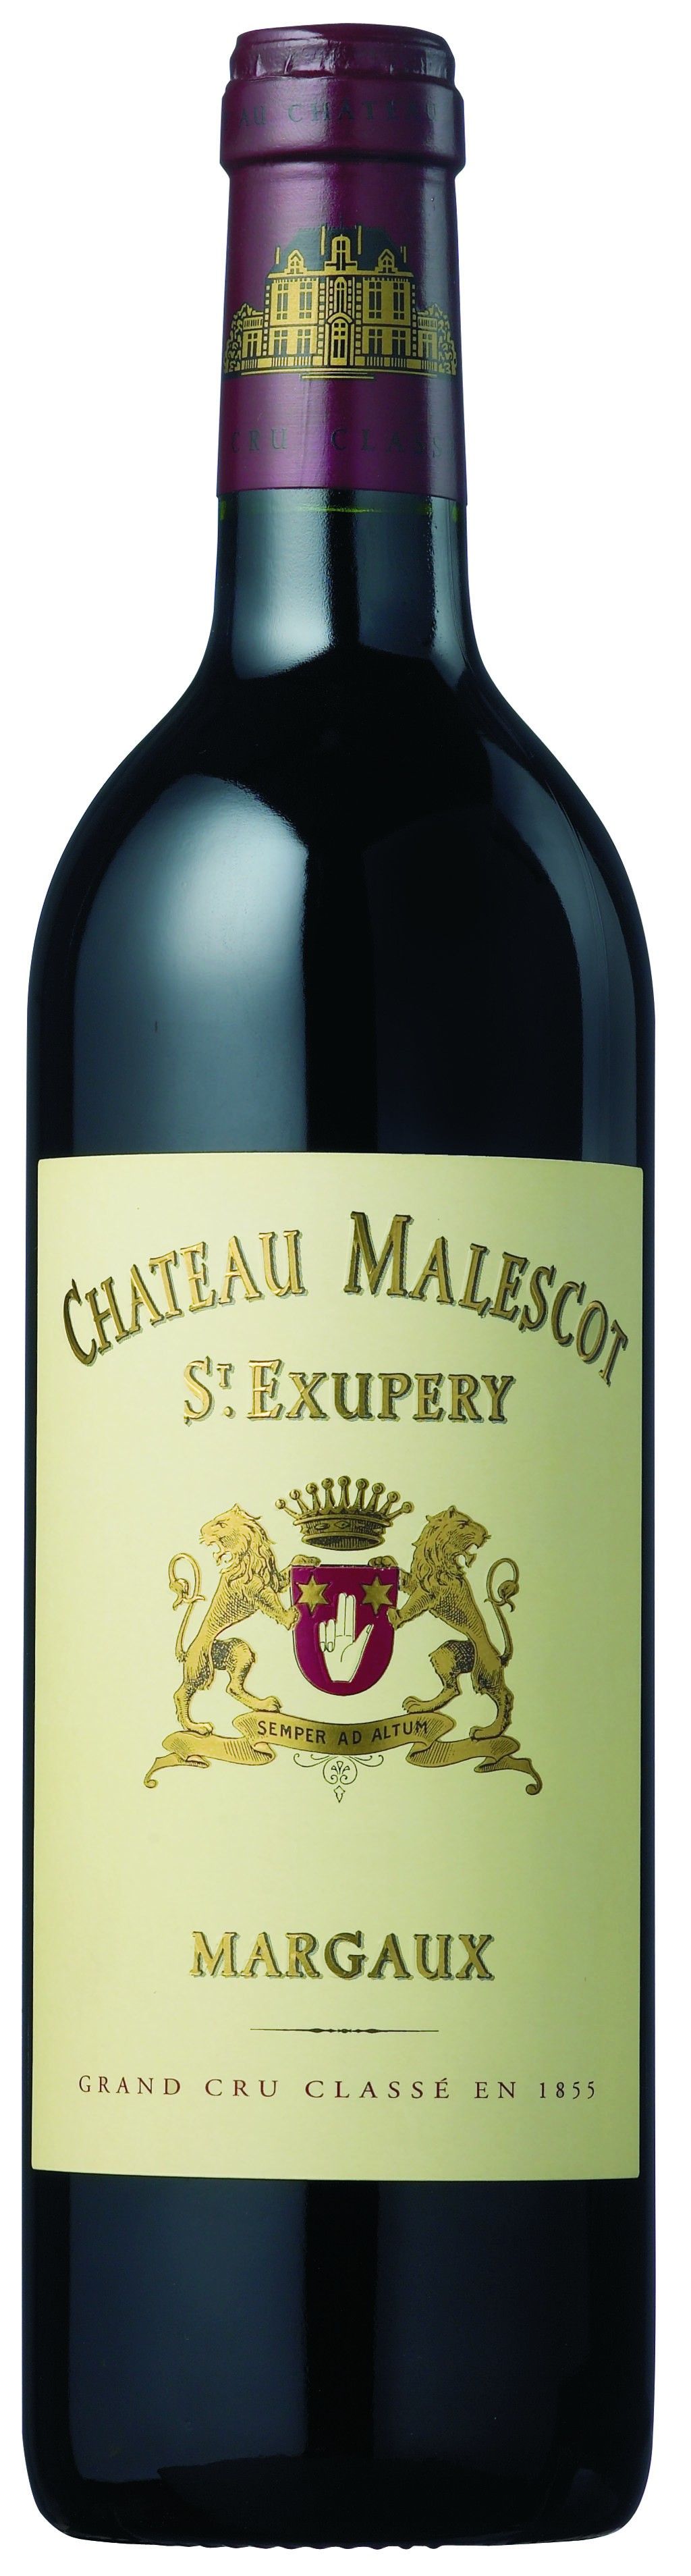 Chateau Malescot-St-Exupery, 2011